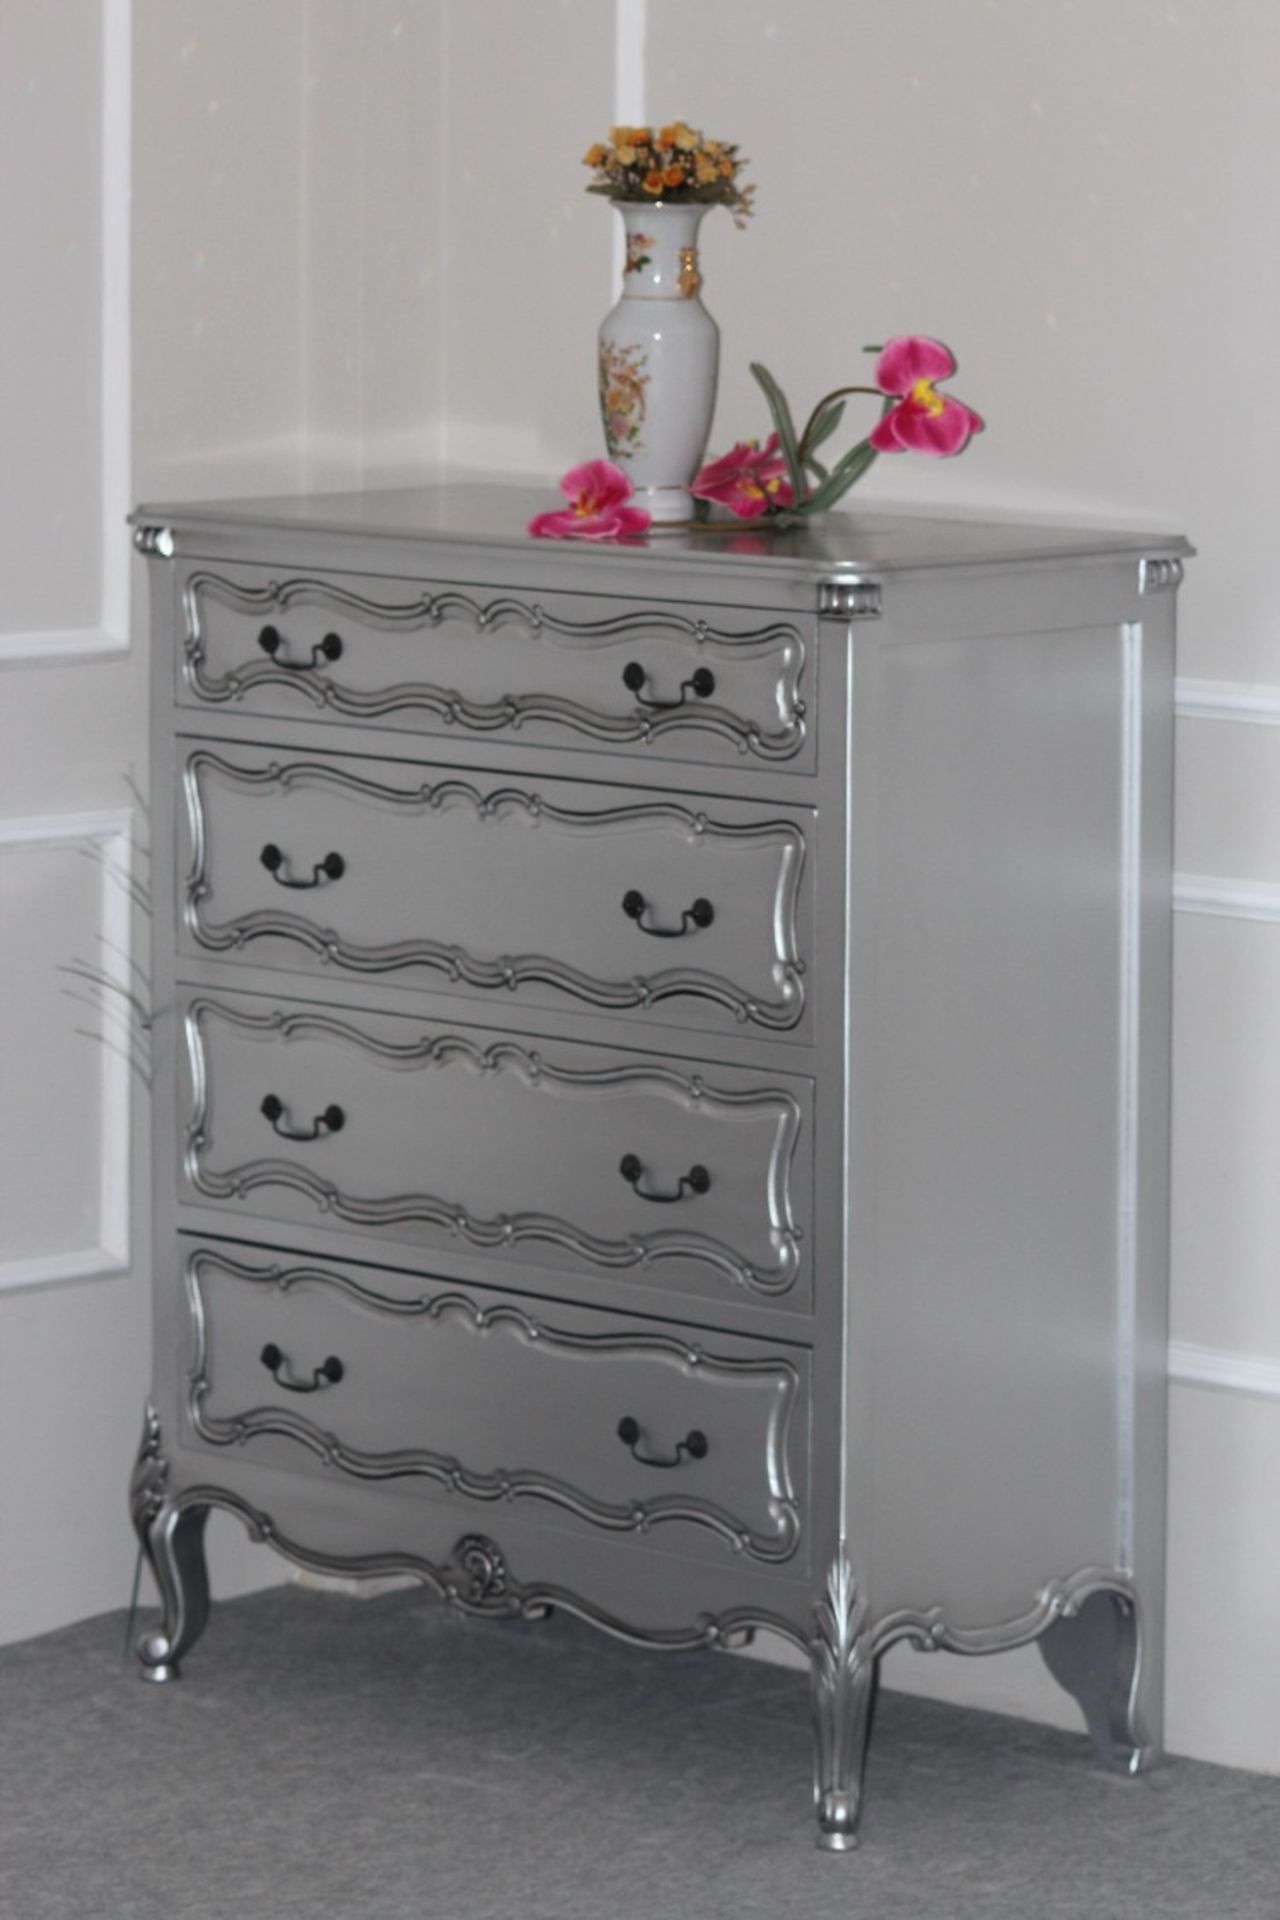 NEW PACKAGED SOLID MAHOGANY 4 DRAWER CHEST IN SILVER